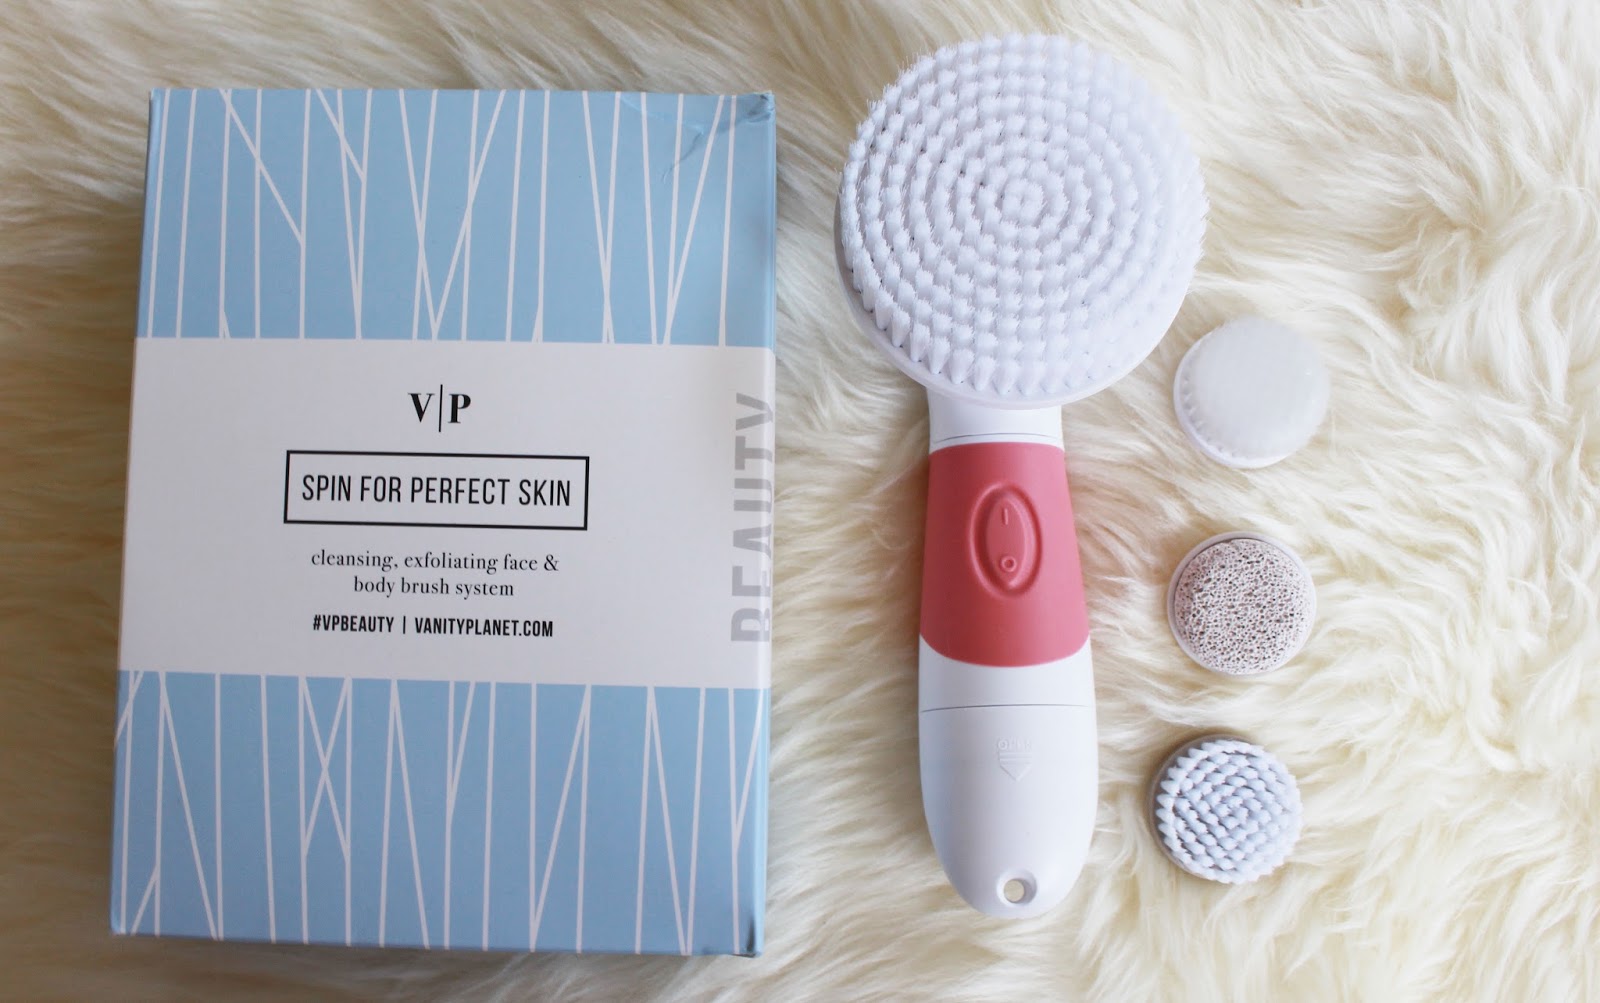 vanity planet uk, vanity planet, vanity planet bloggers, face brush, face brush review, vanity planet brush review